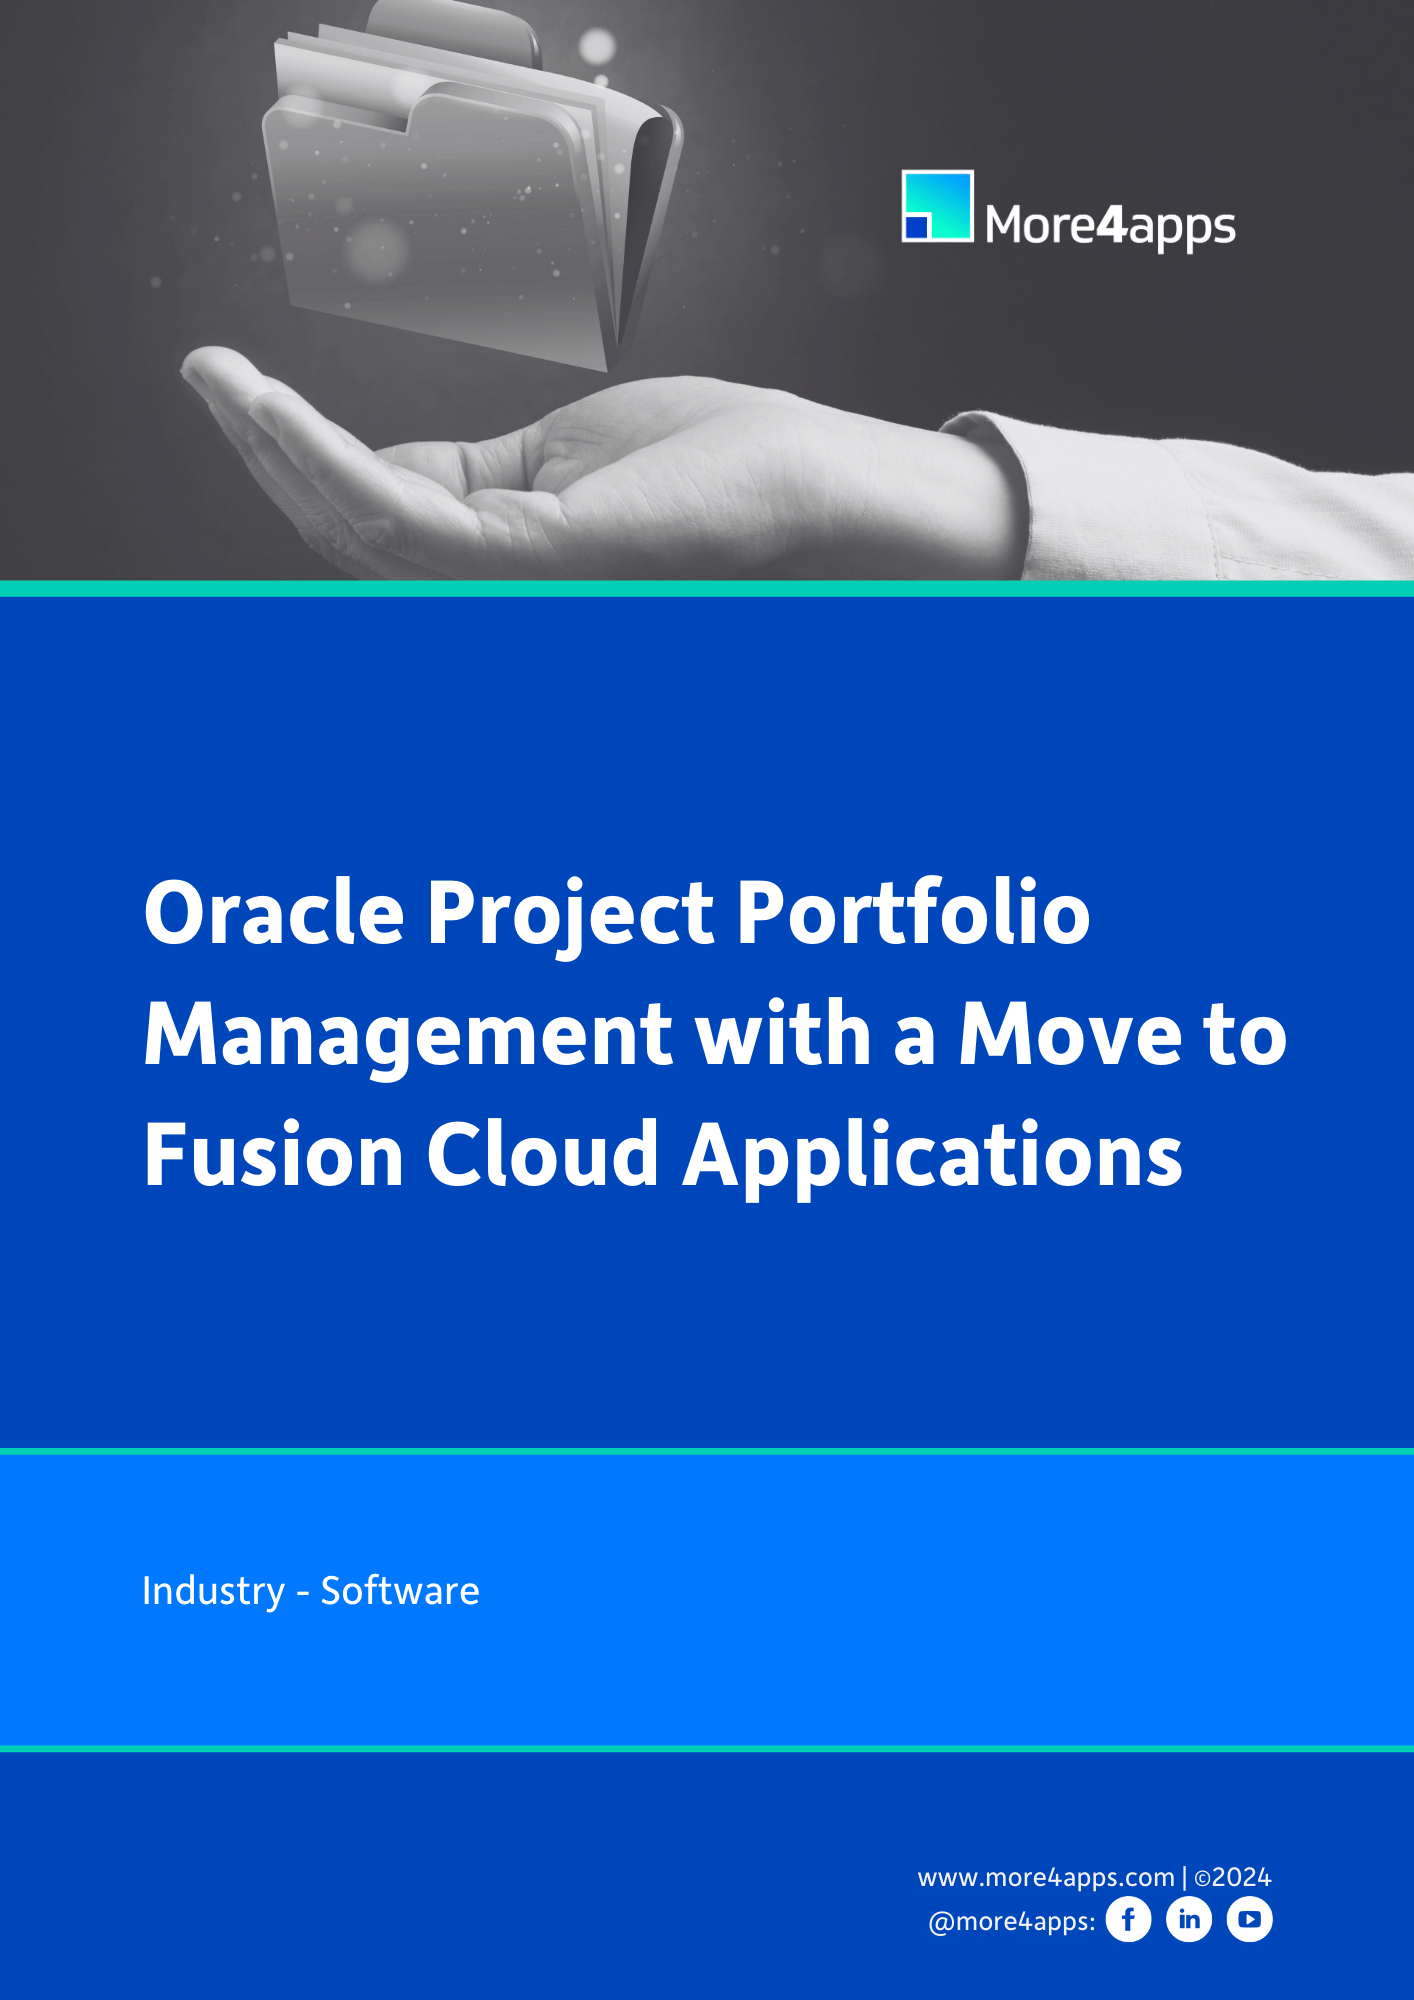 See how our client managed their Oracle Projects portfolio with a migration to Fusion Cloud Applications. Click now to read the case study.